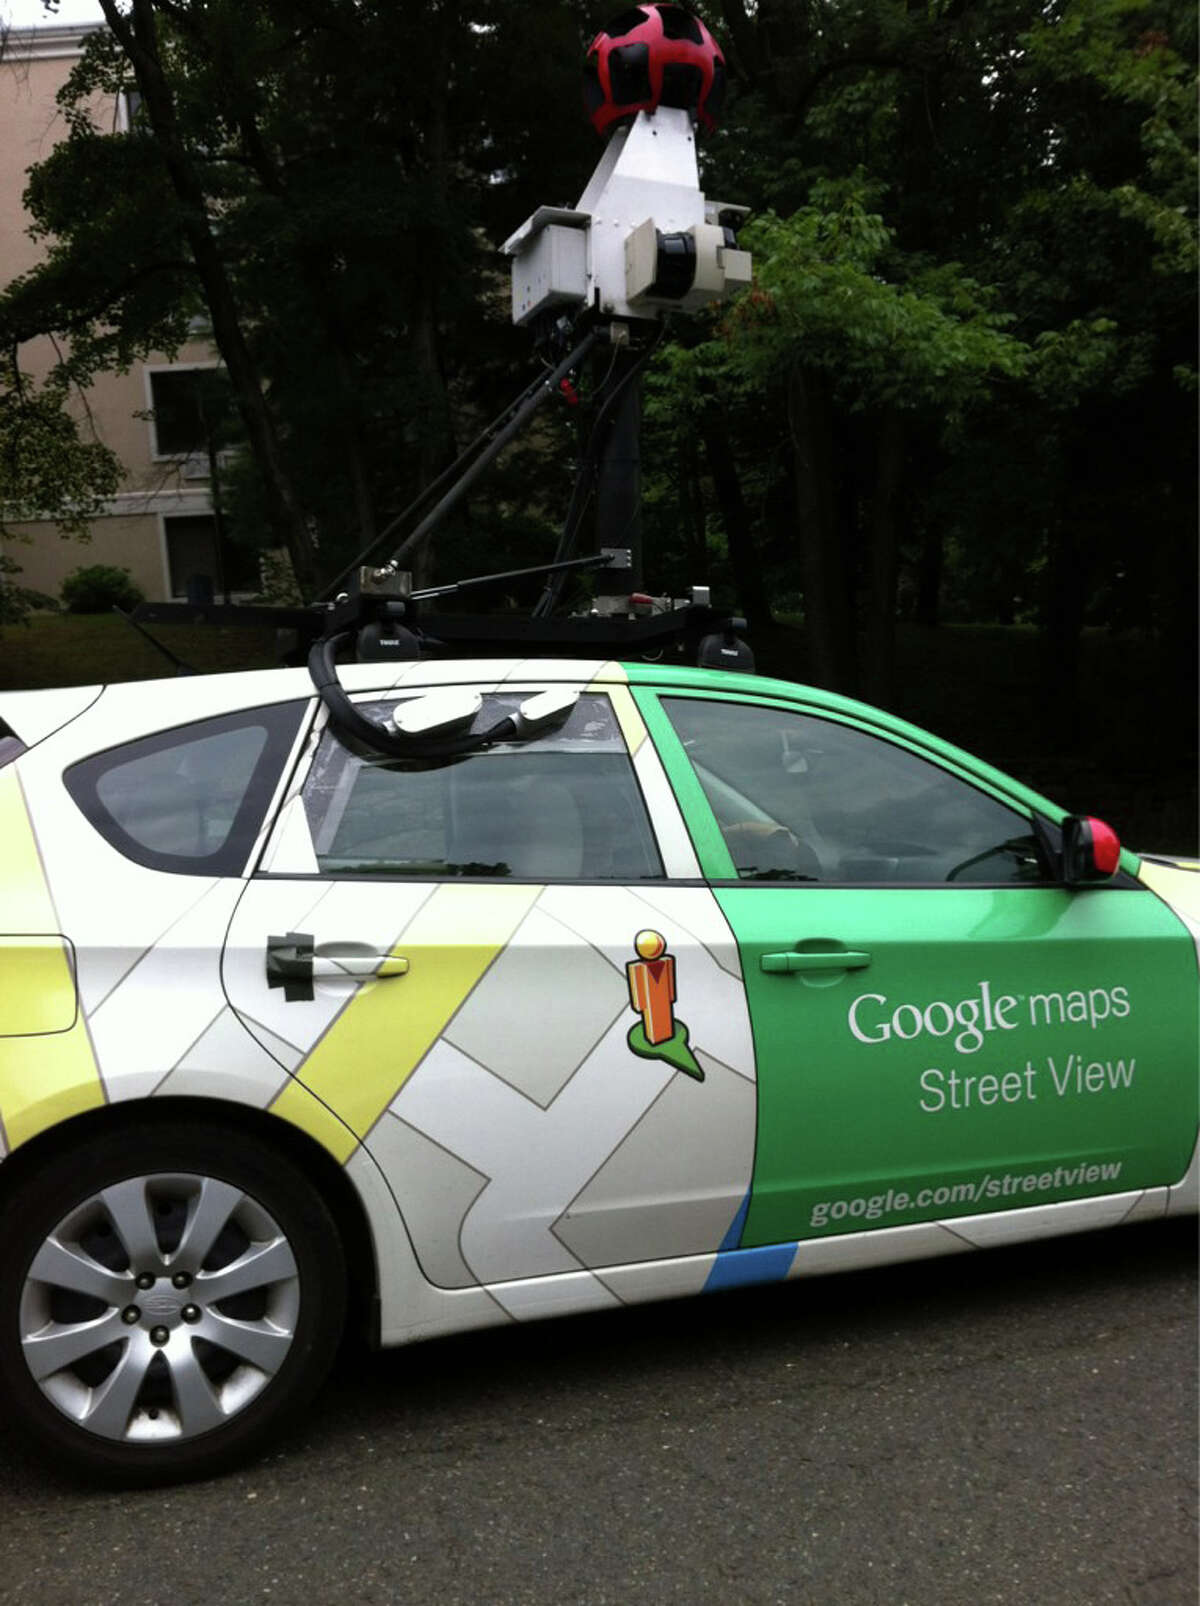 This Google Maps Street View Car was recently spotted on East Putnam Avenue in Old Greenwich near the Stamford town line.